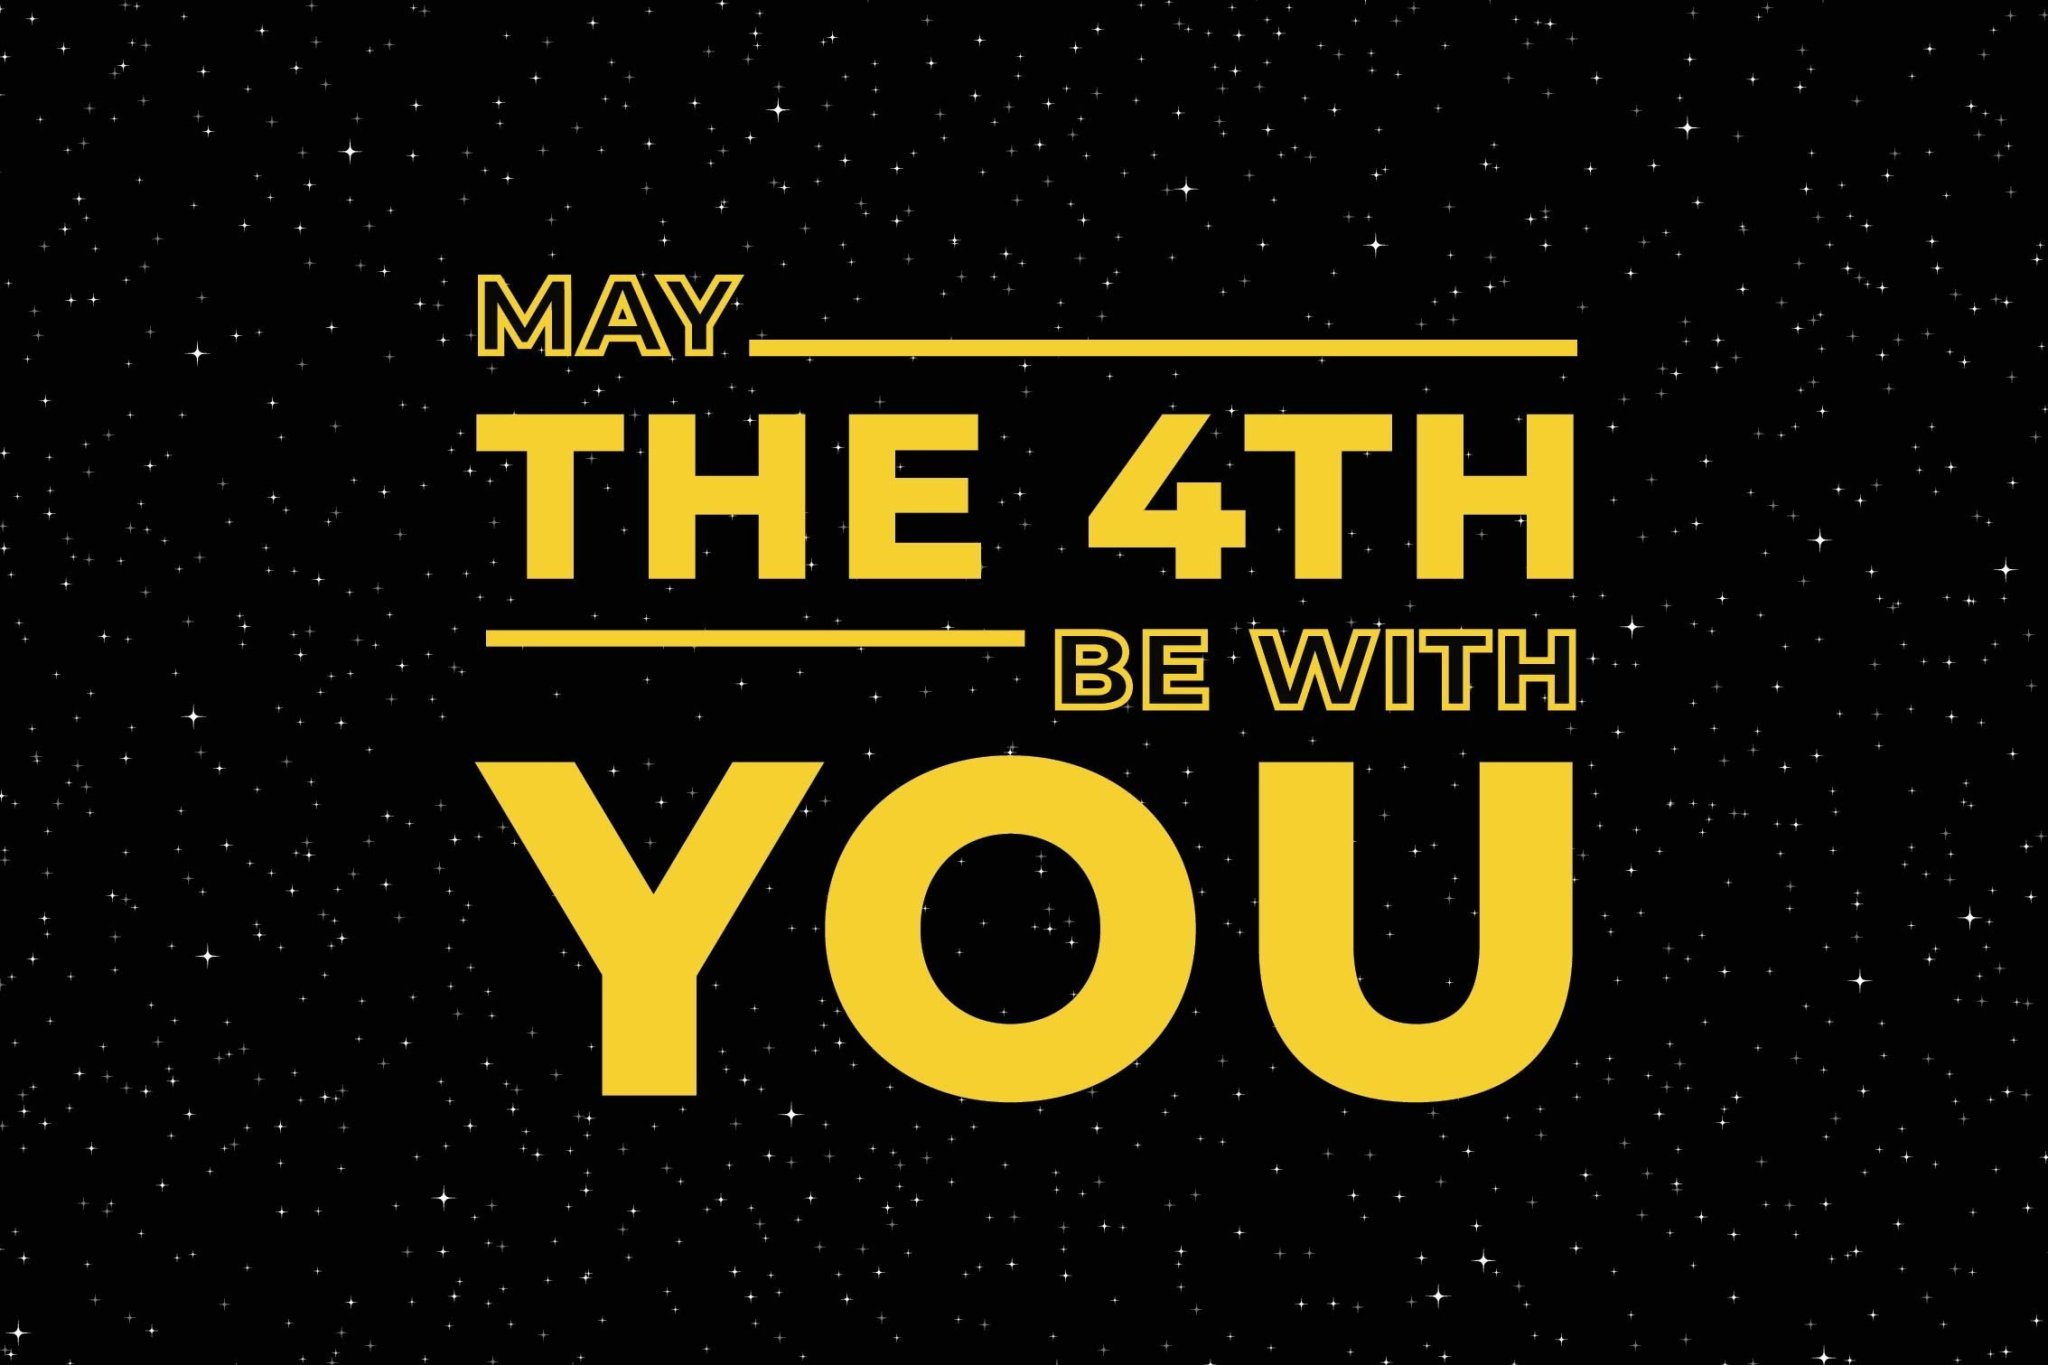 May the 4th: Celebrating the Galactic Star Wars Holiday